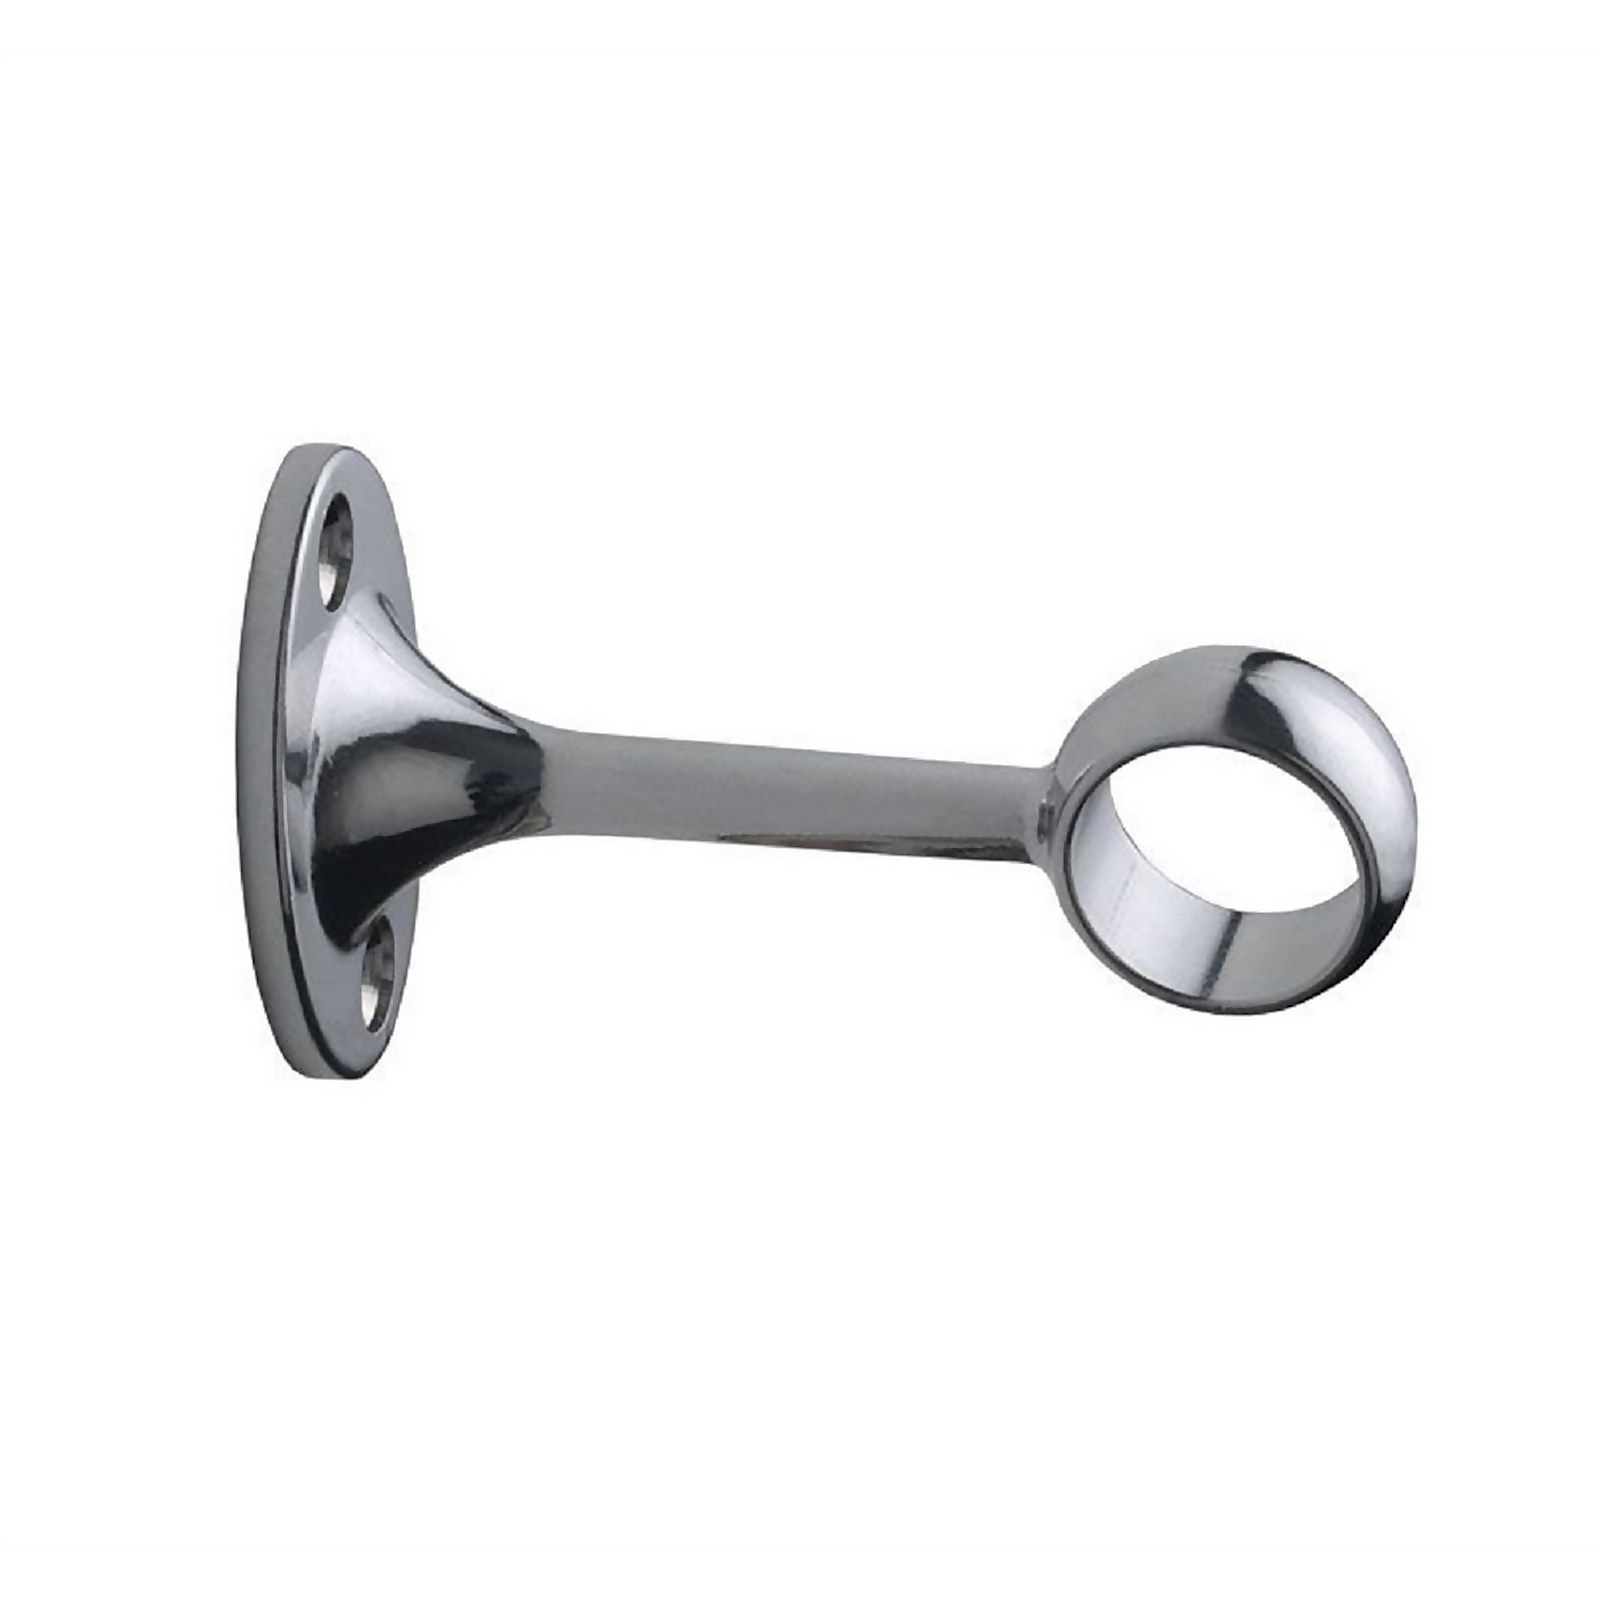 Photo of Rothley Deluxe Centre Bracket - Chrome - 25mm